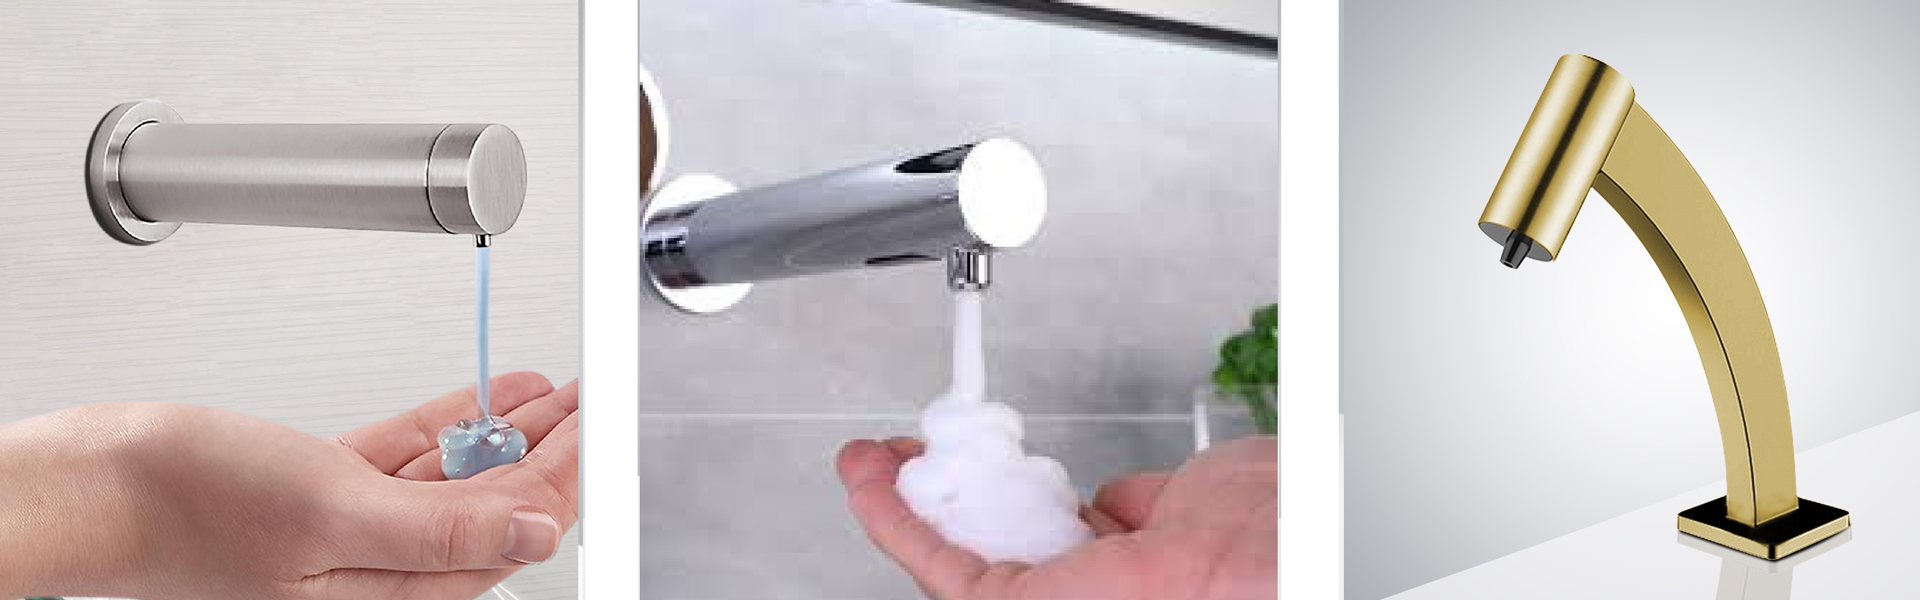 How to Troubleshoot Common Issues with Automatic Foam Soap Dispenser